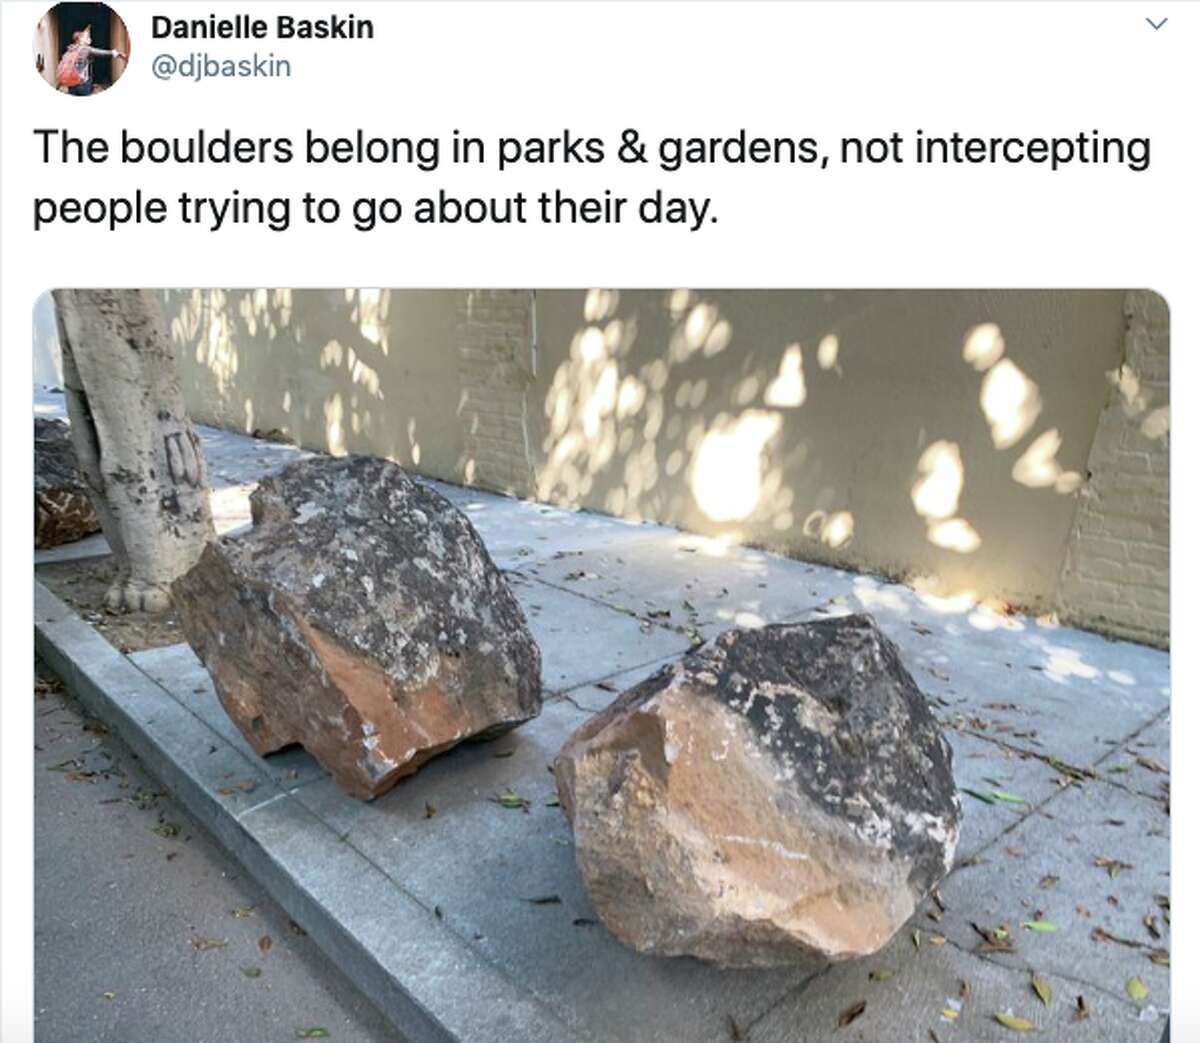 A San Francisco woman tried unsuccessfully to remove the controversial 'anti-homeless' boulders from a sidewalk.